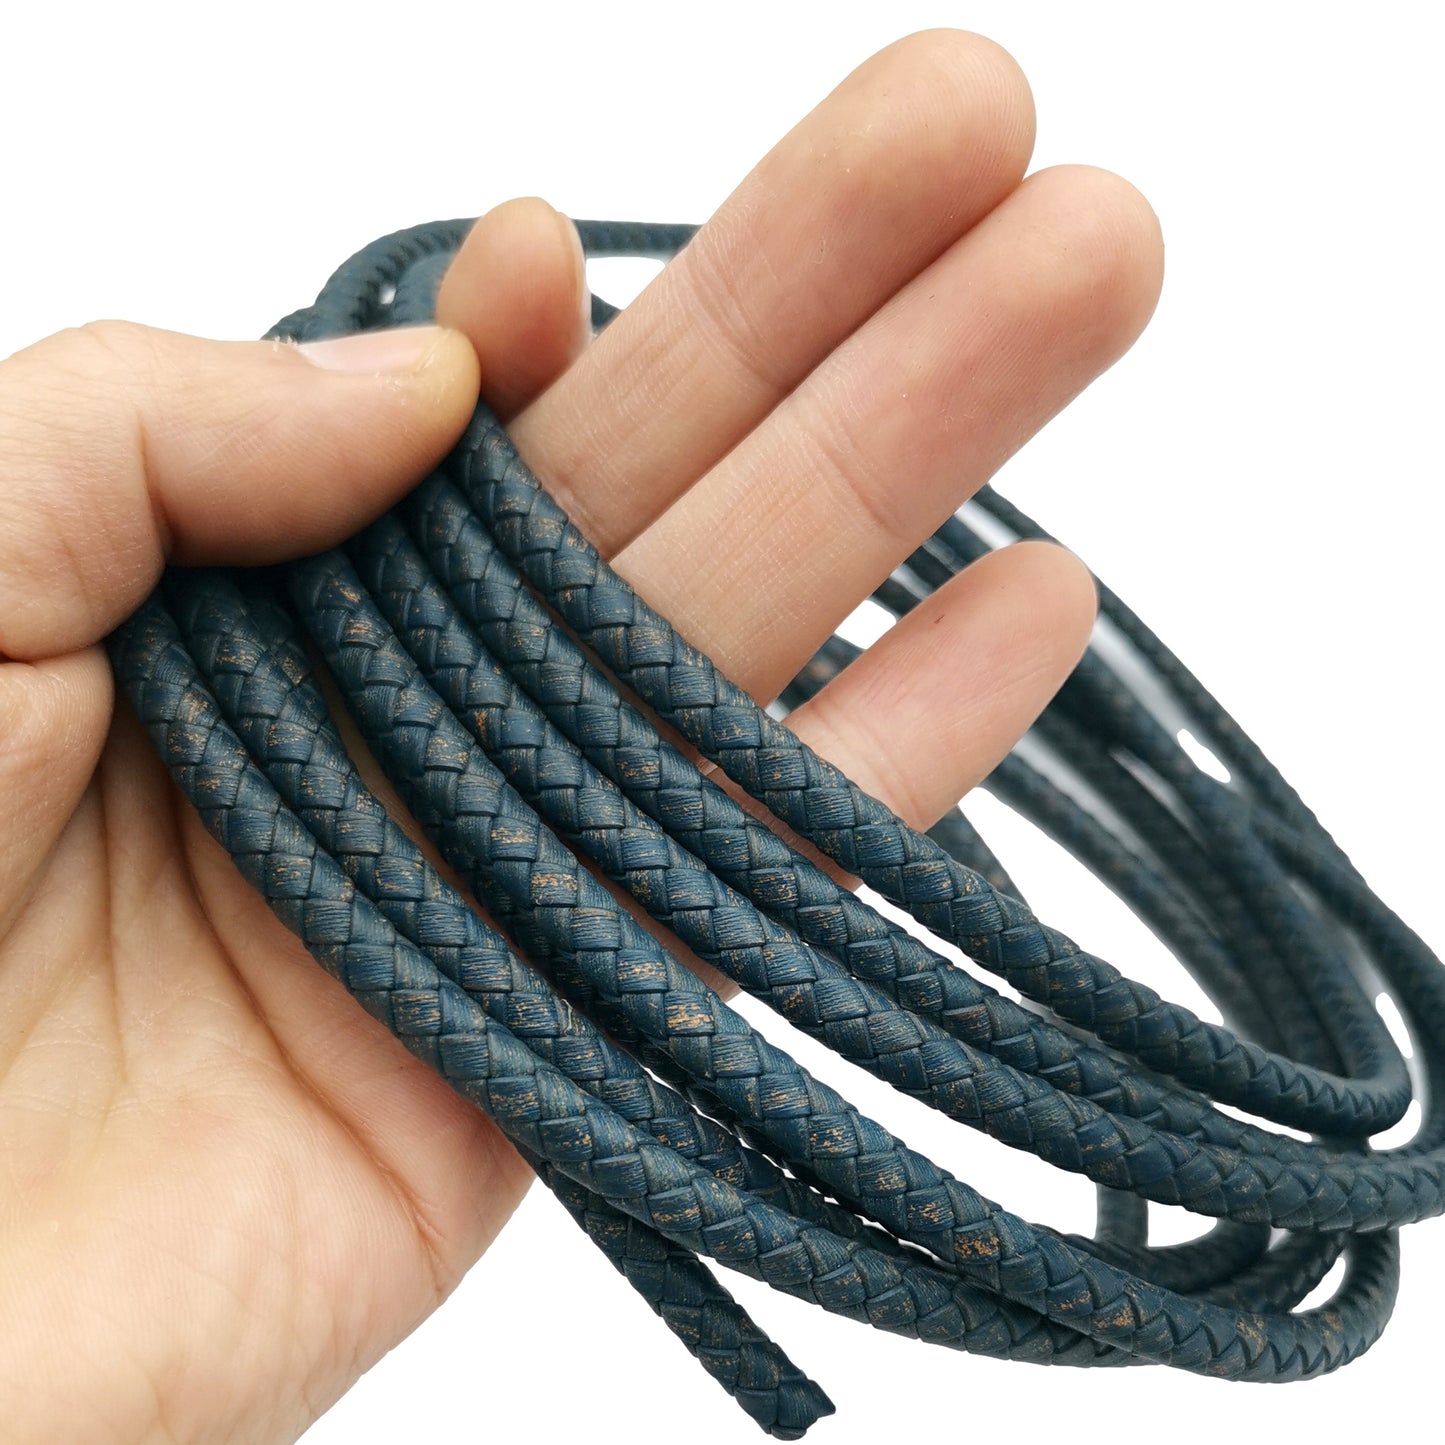 shapesbyX-6mm Round Braided Leather Bolo Cord Distressed Blue Antique Color Jewelry Making Leather Craft